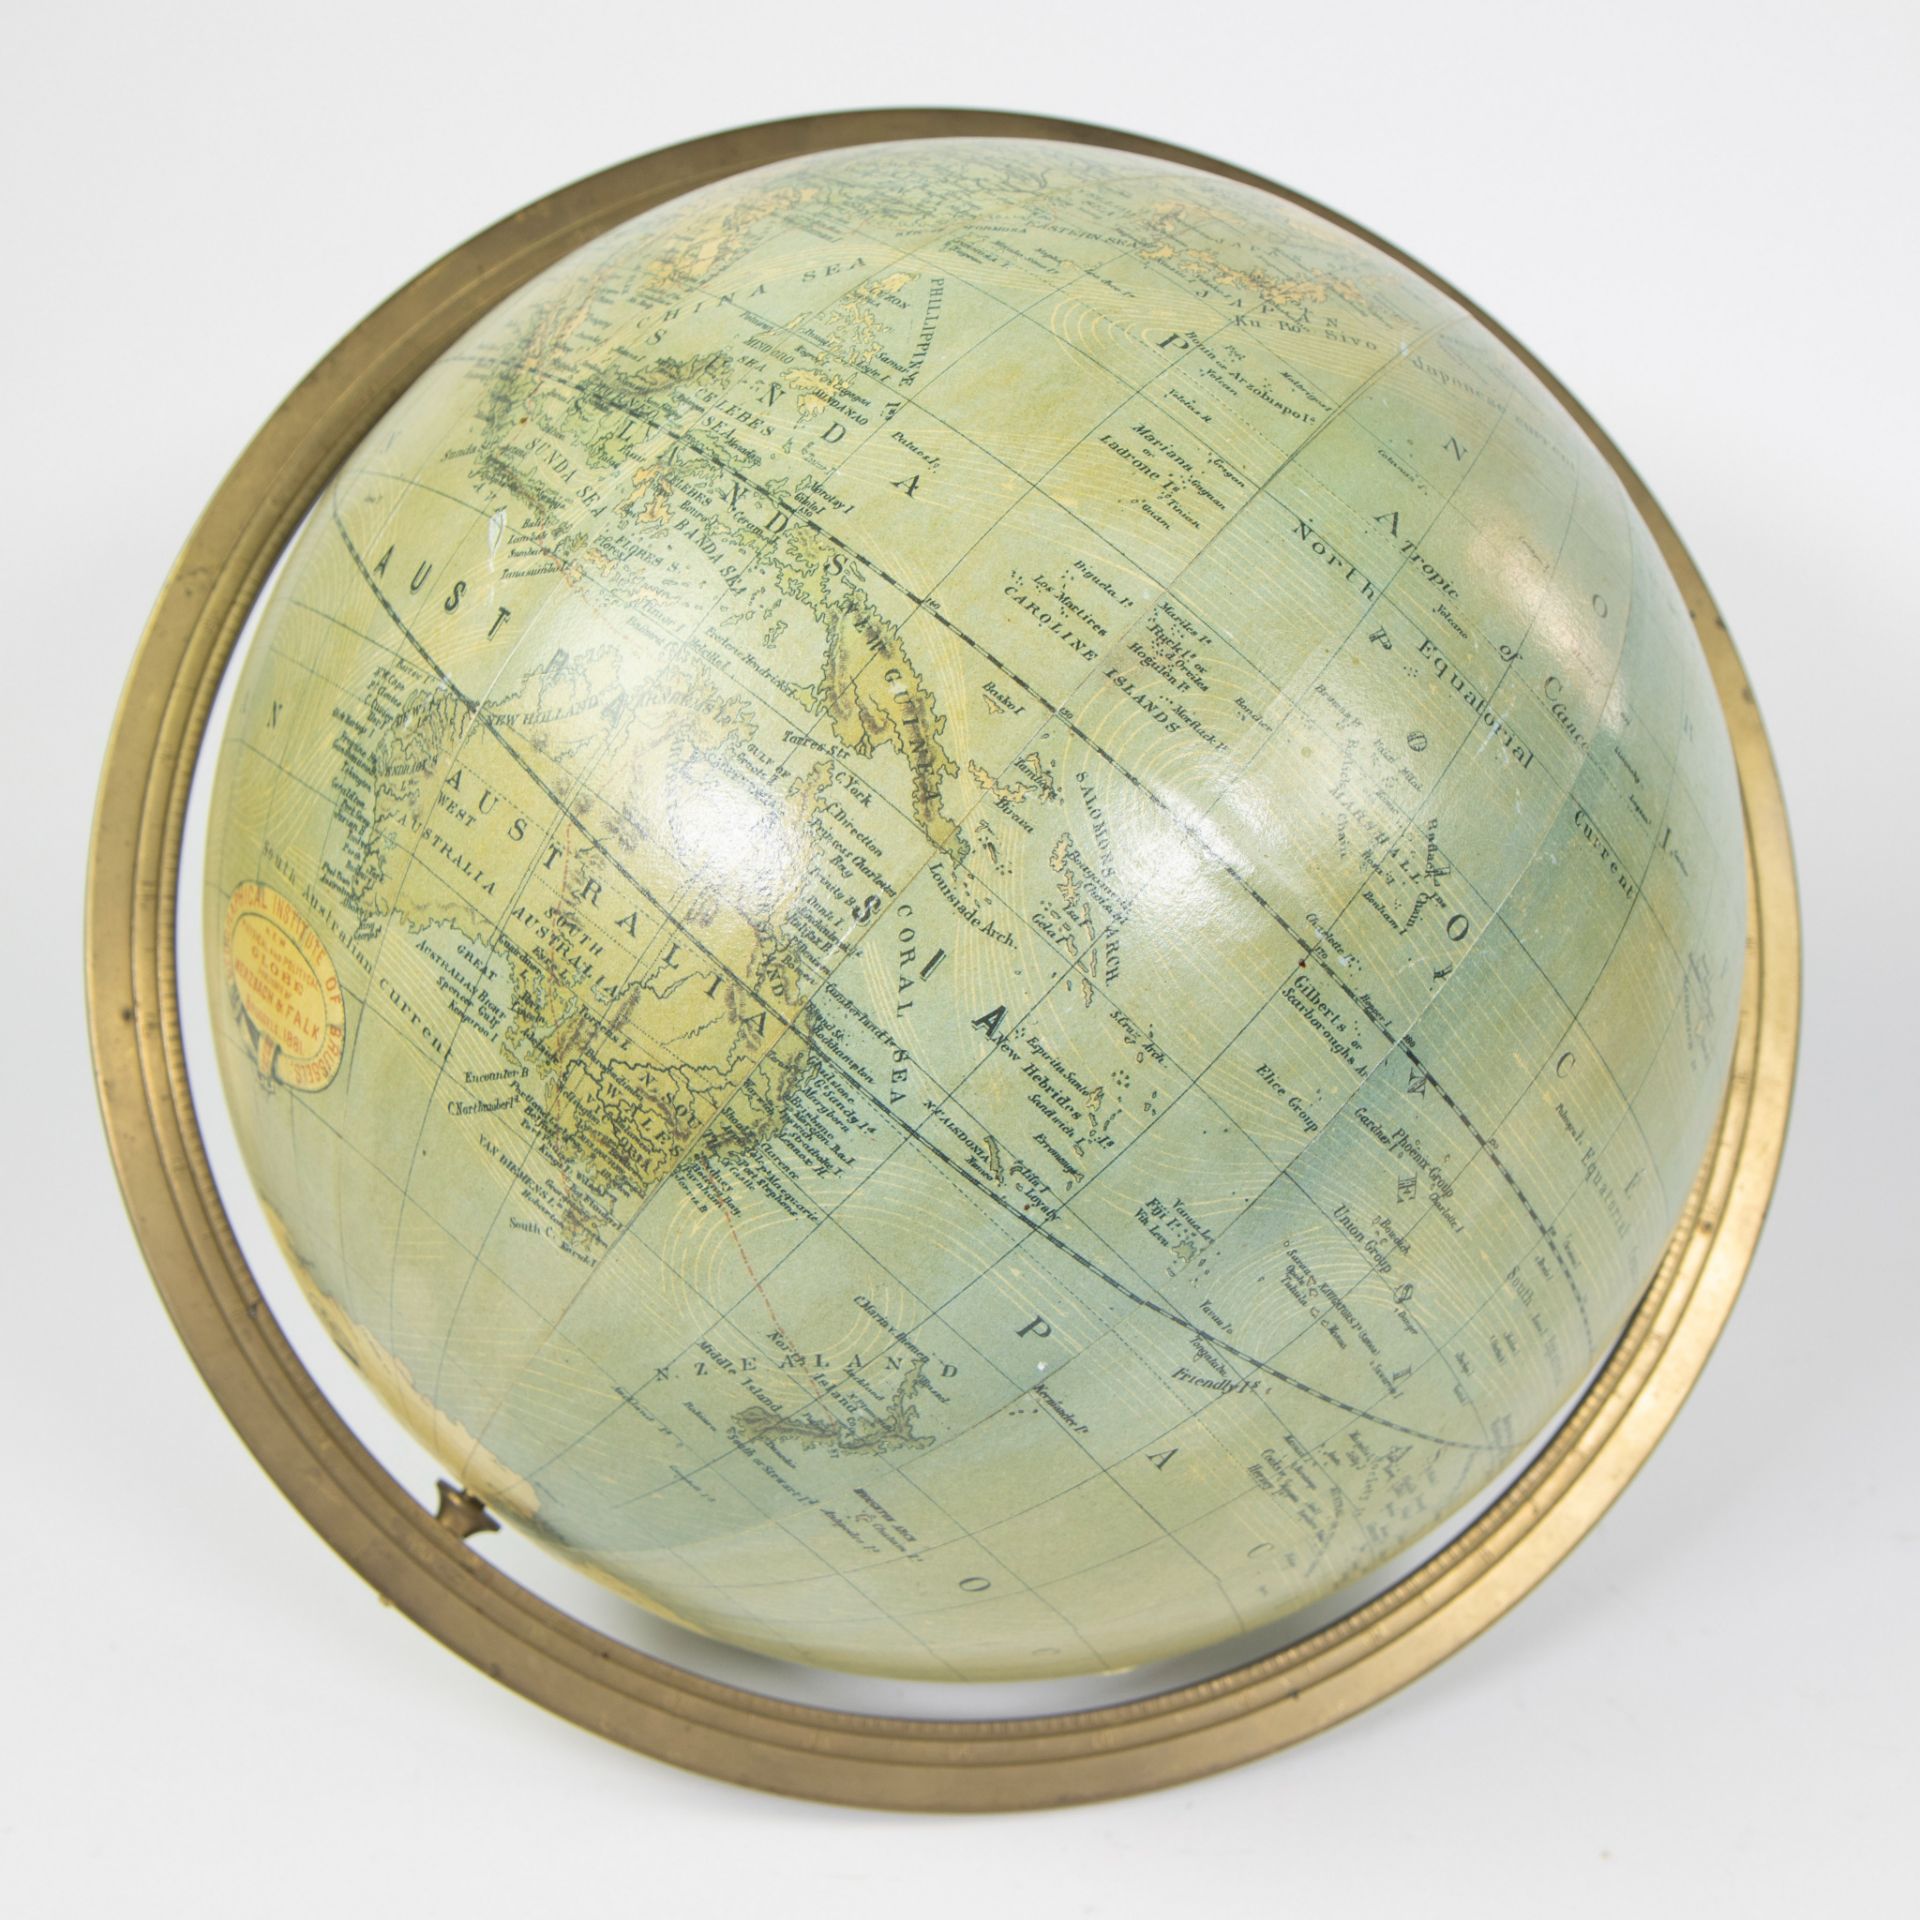 Vintage Merzbach and Falk physical and Political globe on stand, Geographical Institute of Brussels - Image 5 of 7